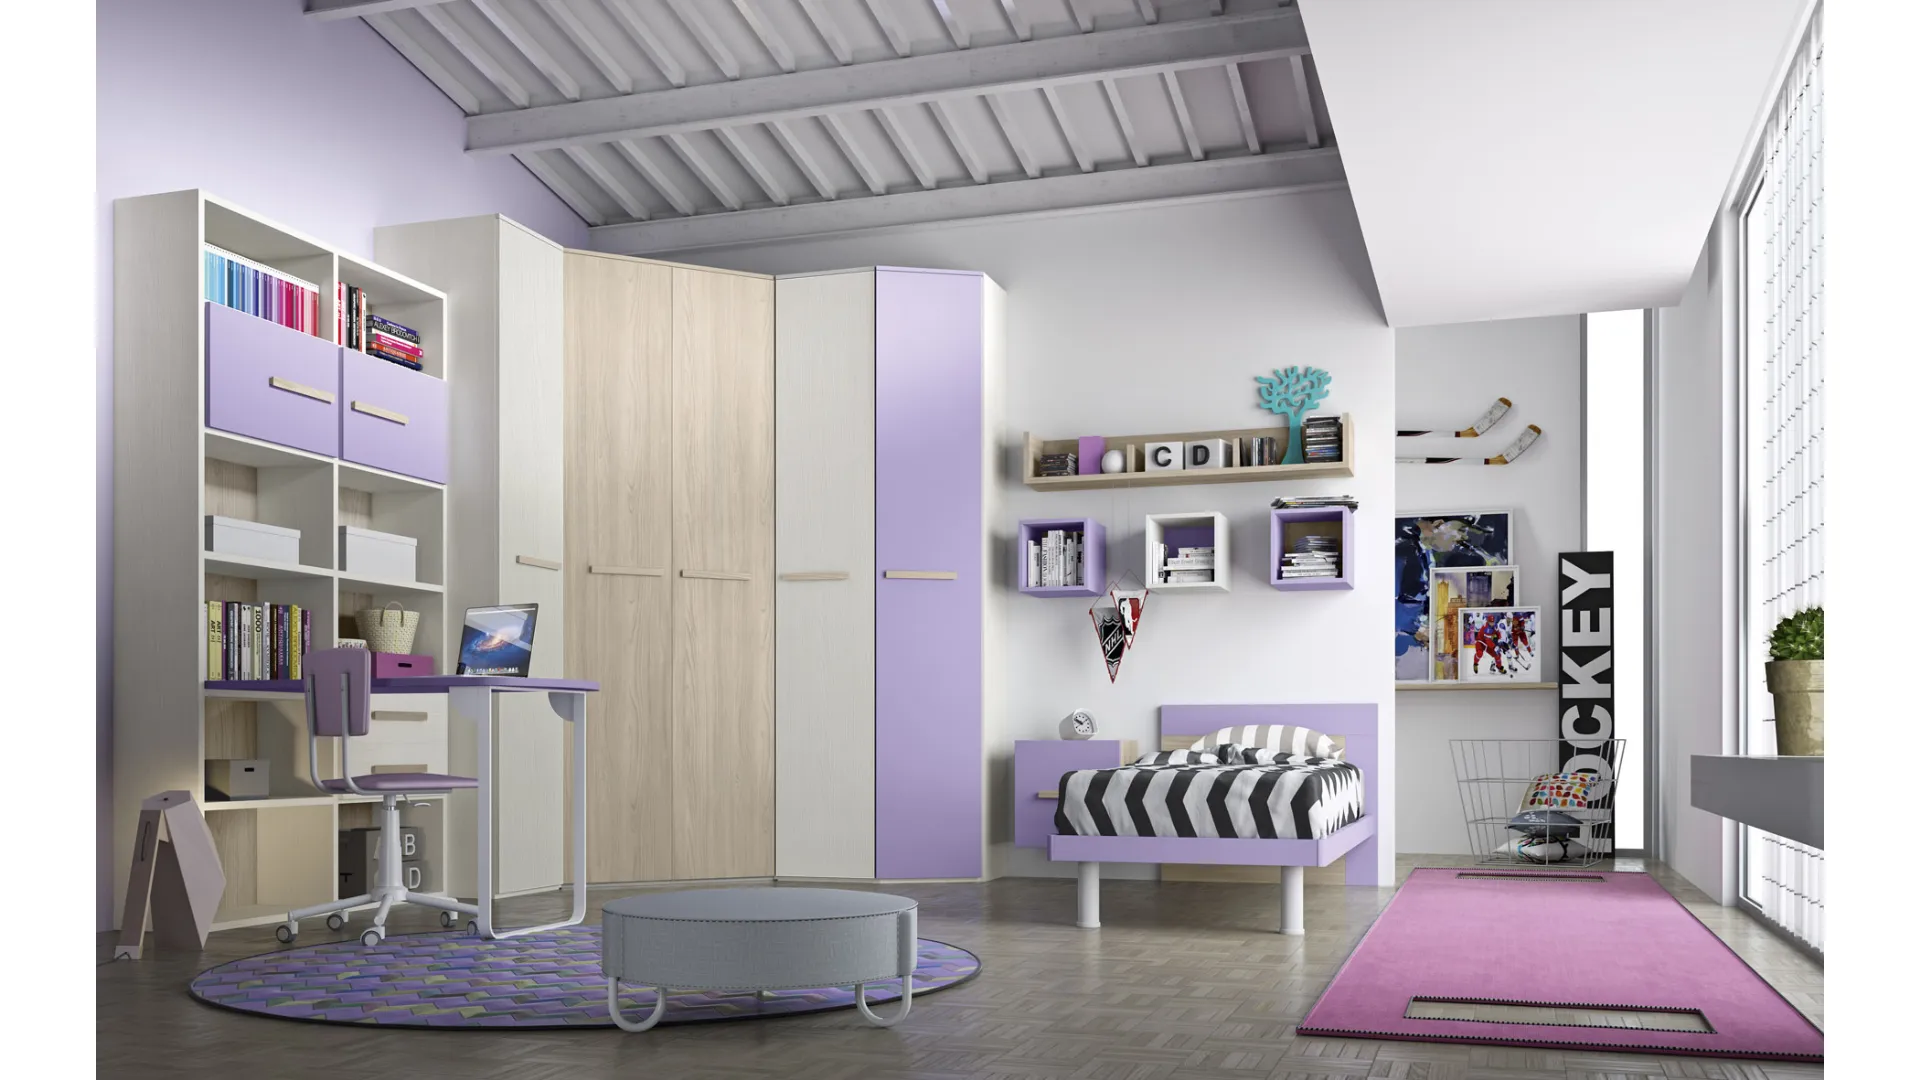 Colorful children's room